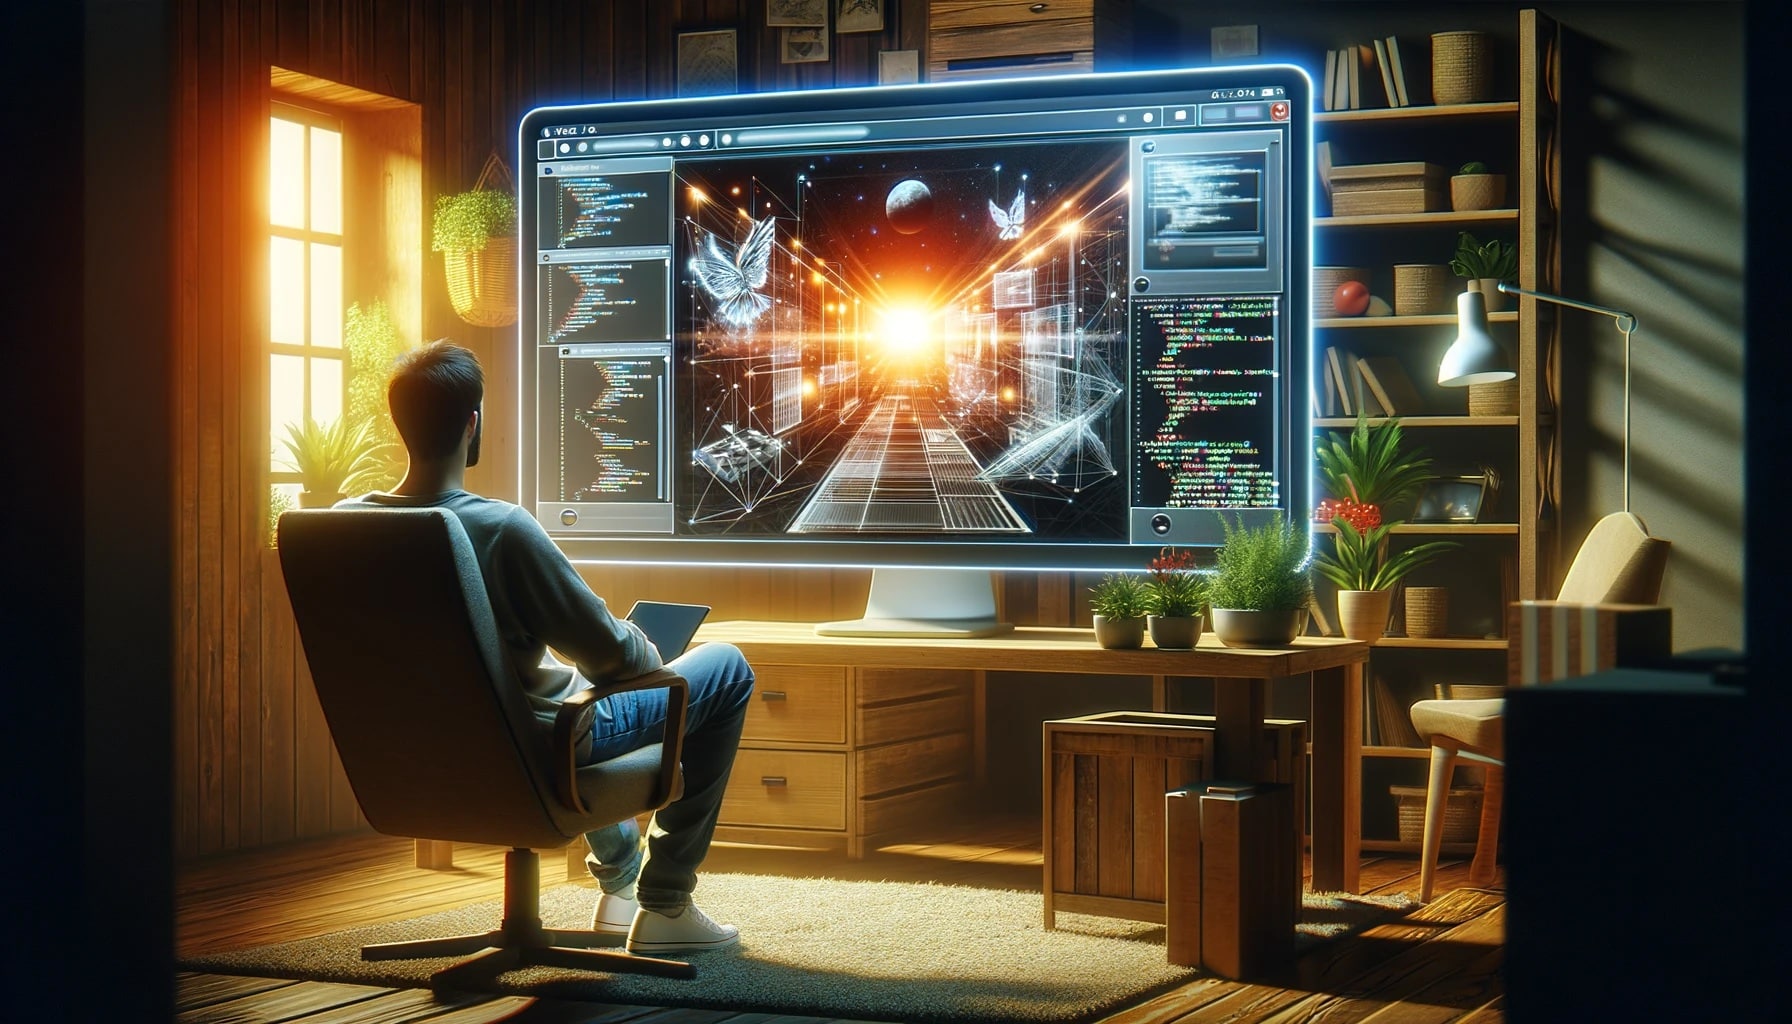 AI Website Builder - A wide image showing a person sitting in a comfortable chair, looking at a large computer monitor where a website is being constructed by AI.